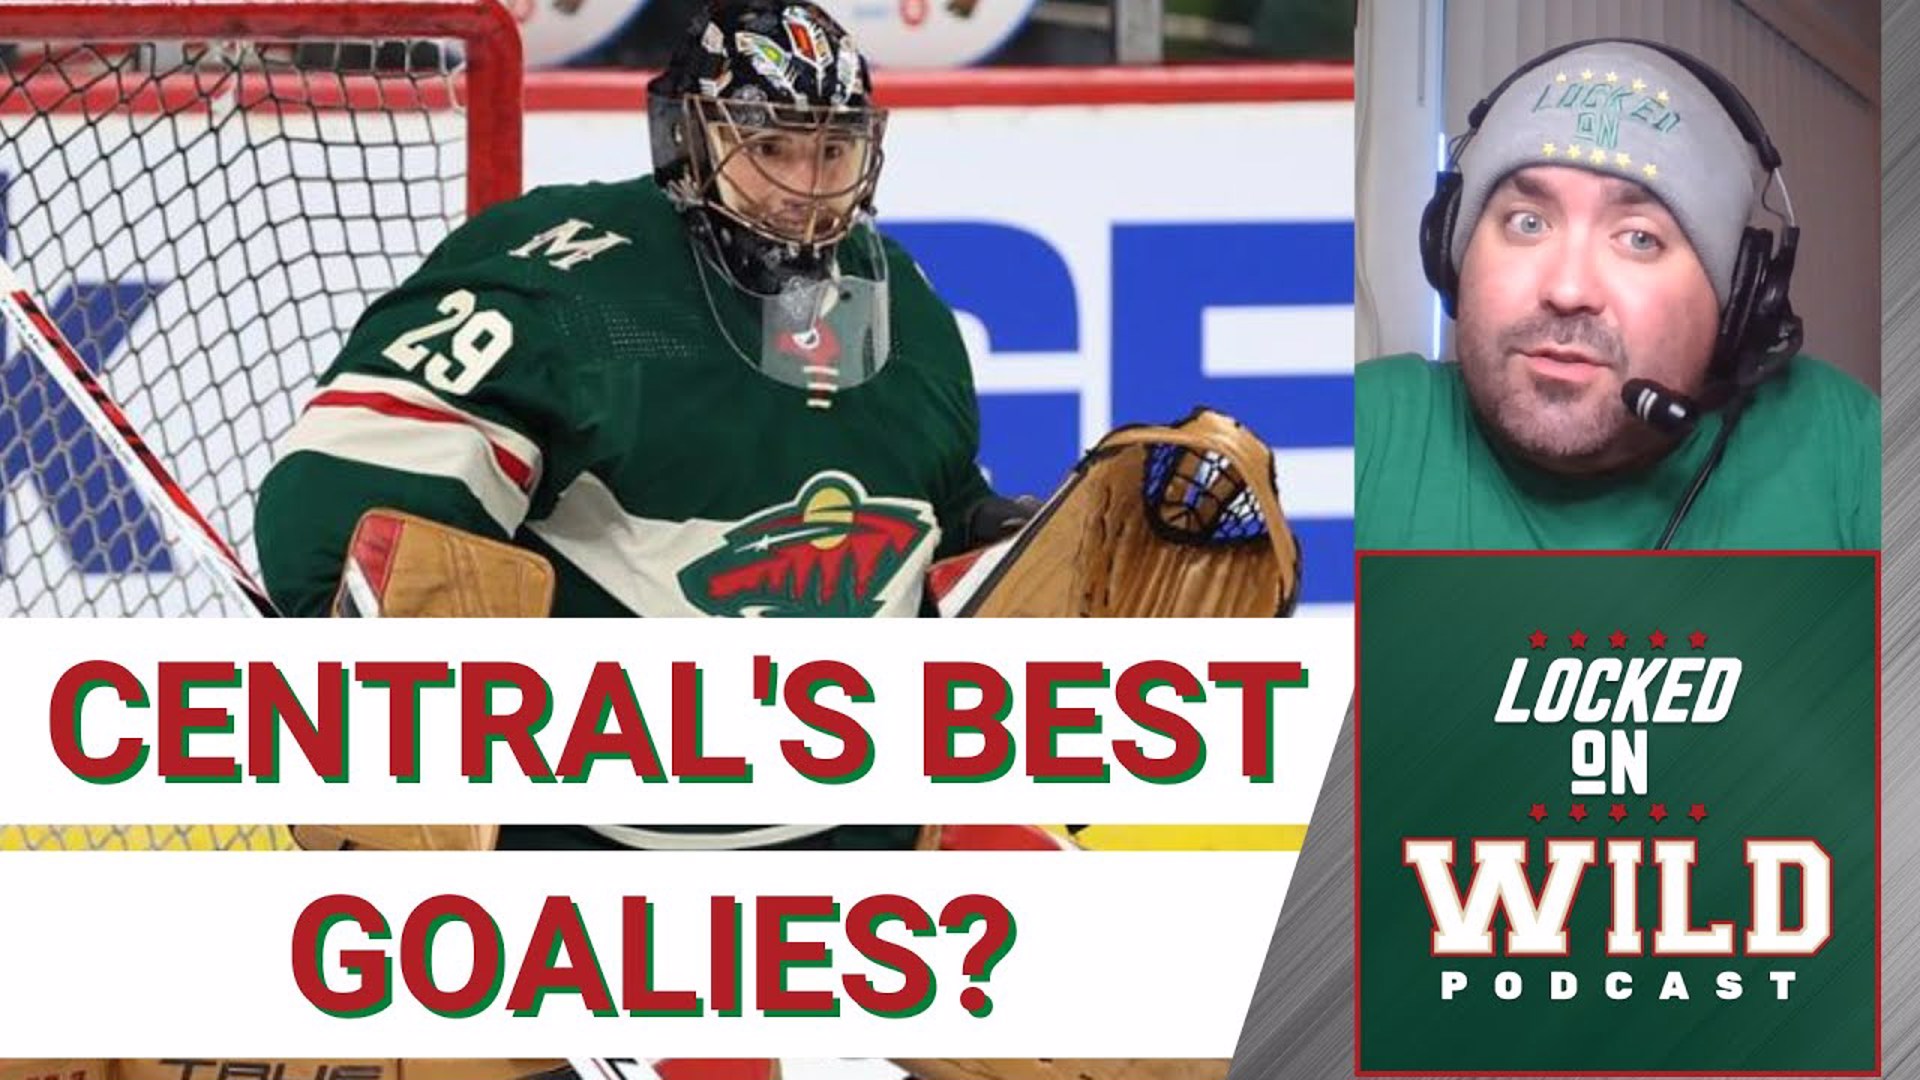 Where do Minnesota Wild Goalies rank in the Central Division?